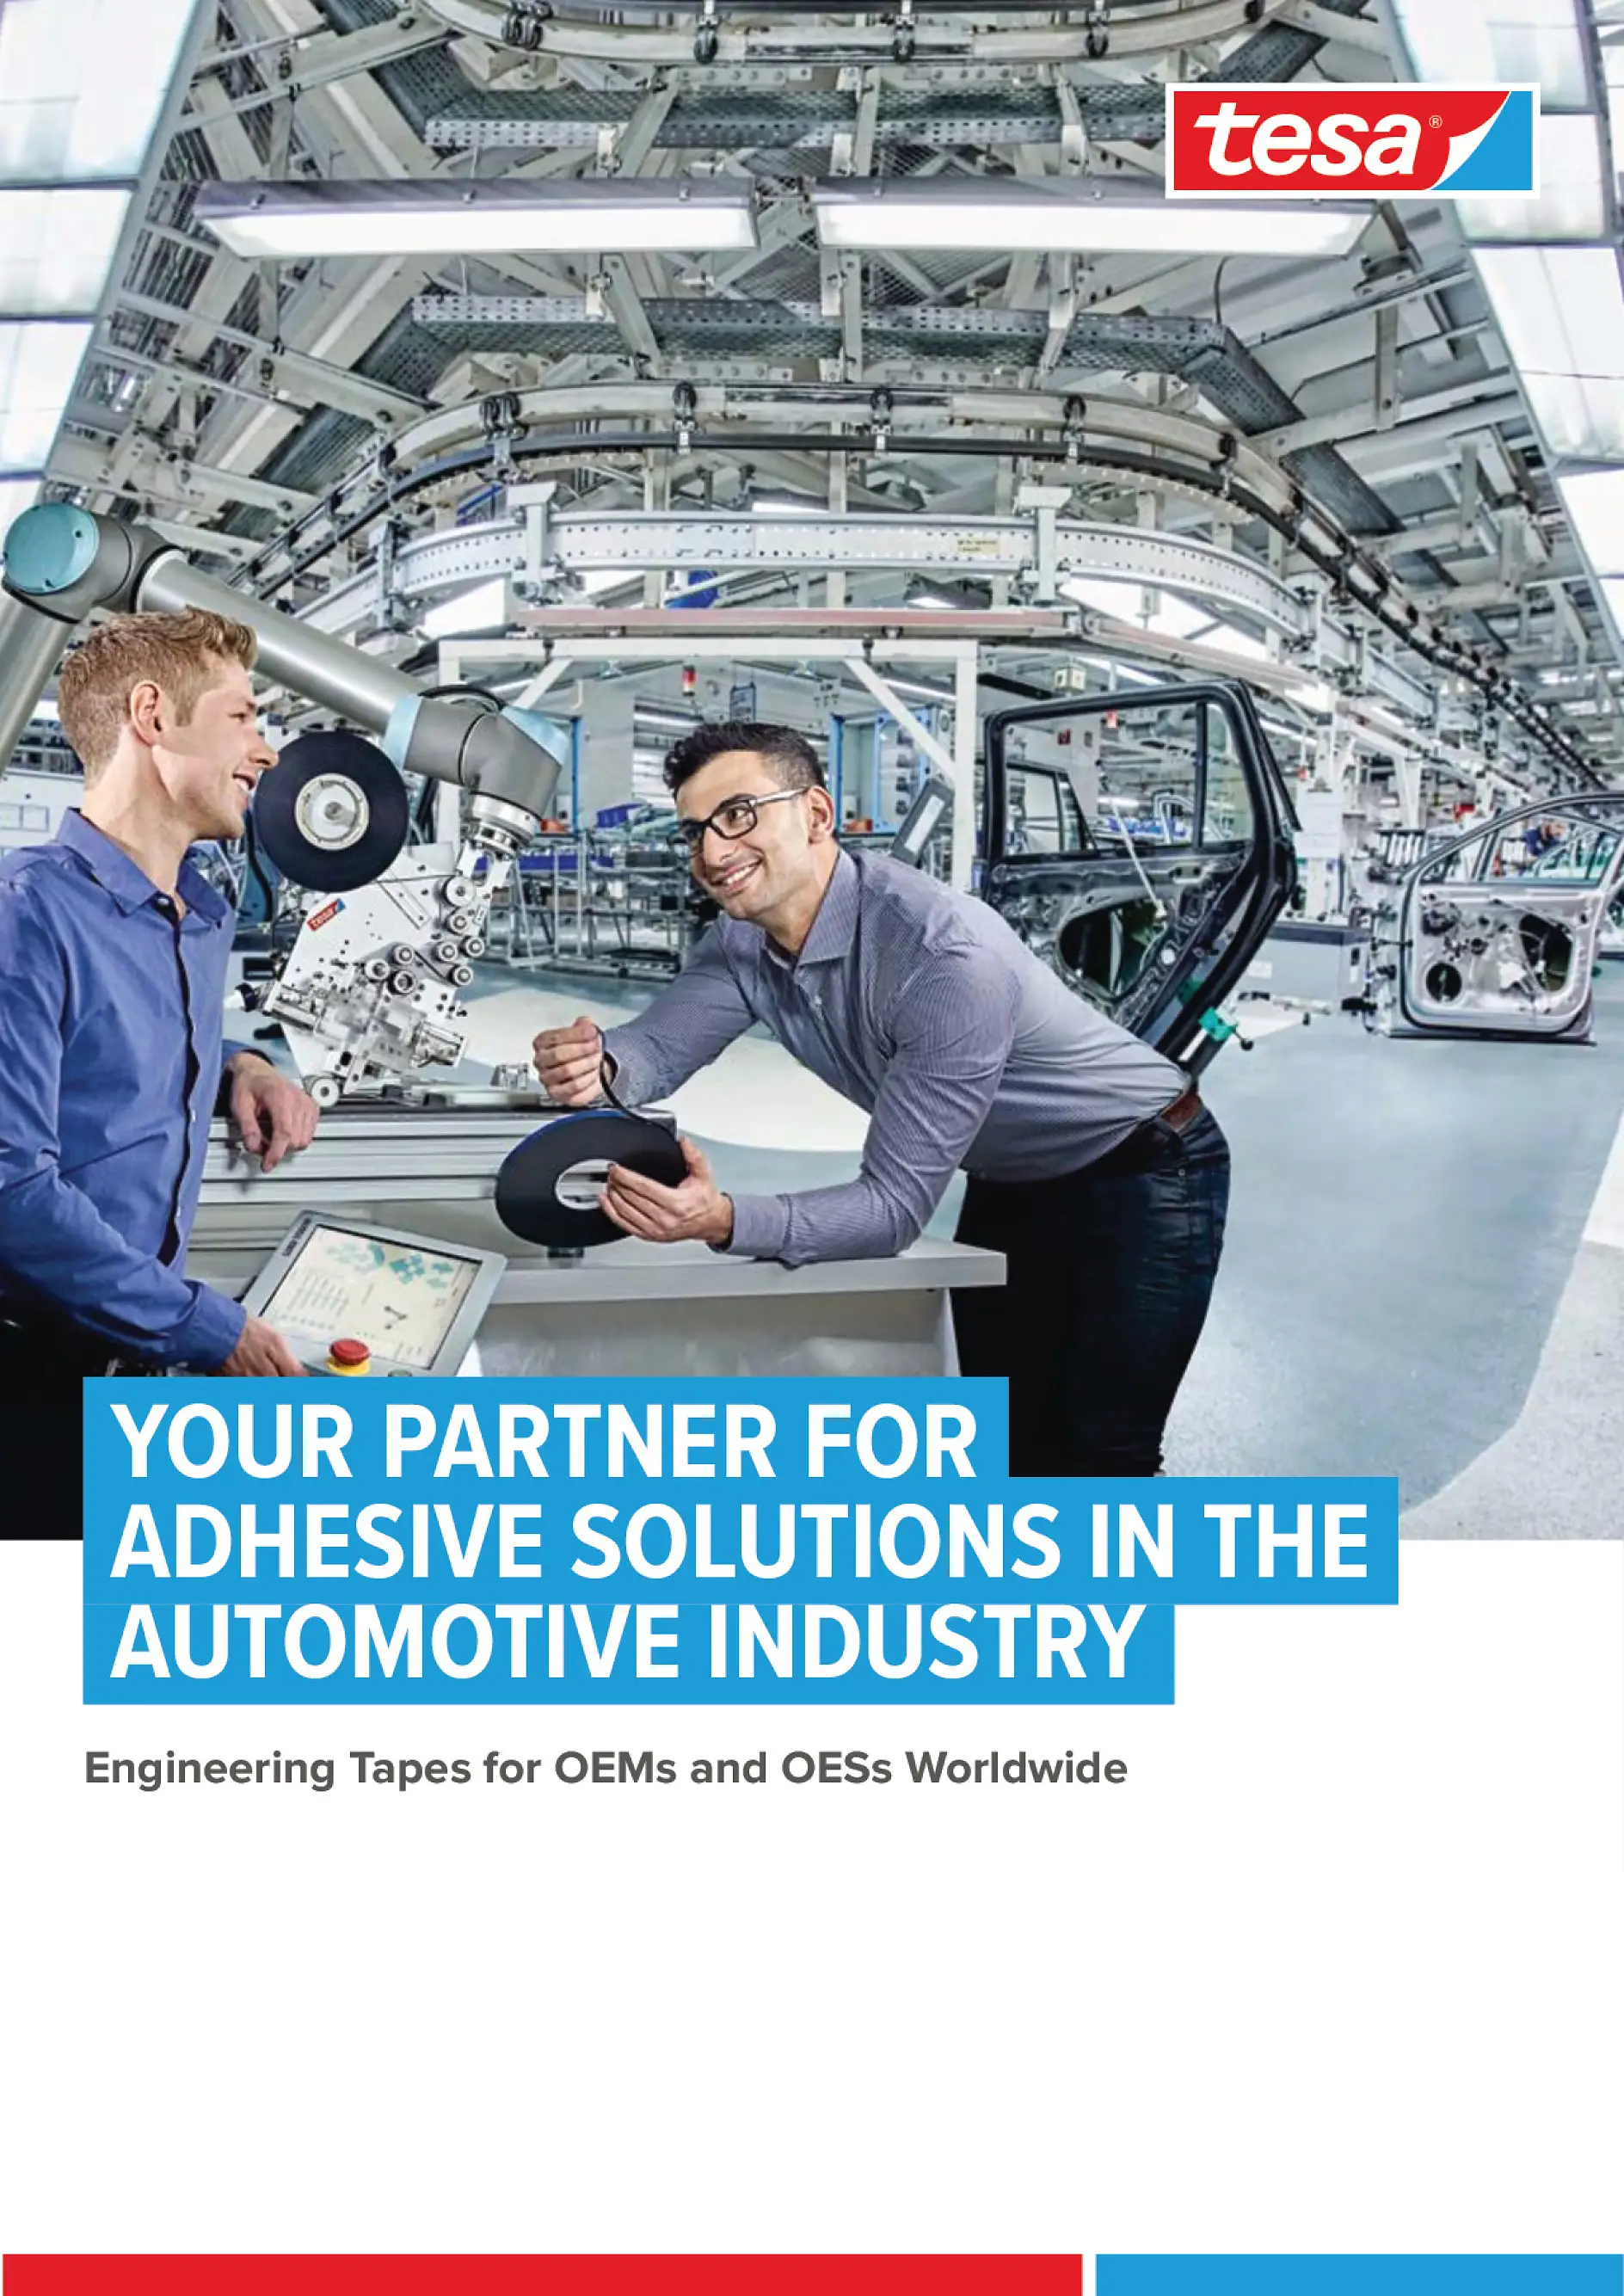 tesa Solutions for the Automotive Industry